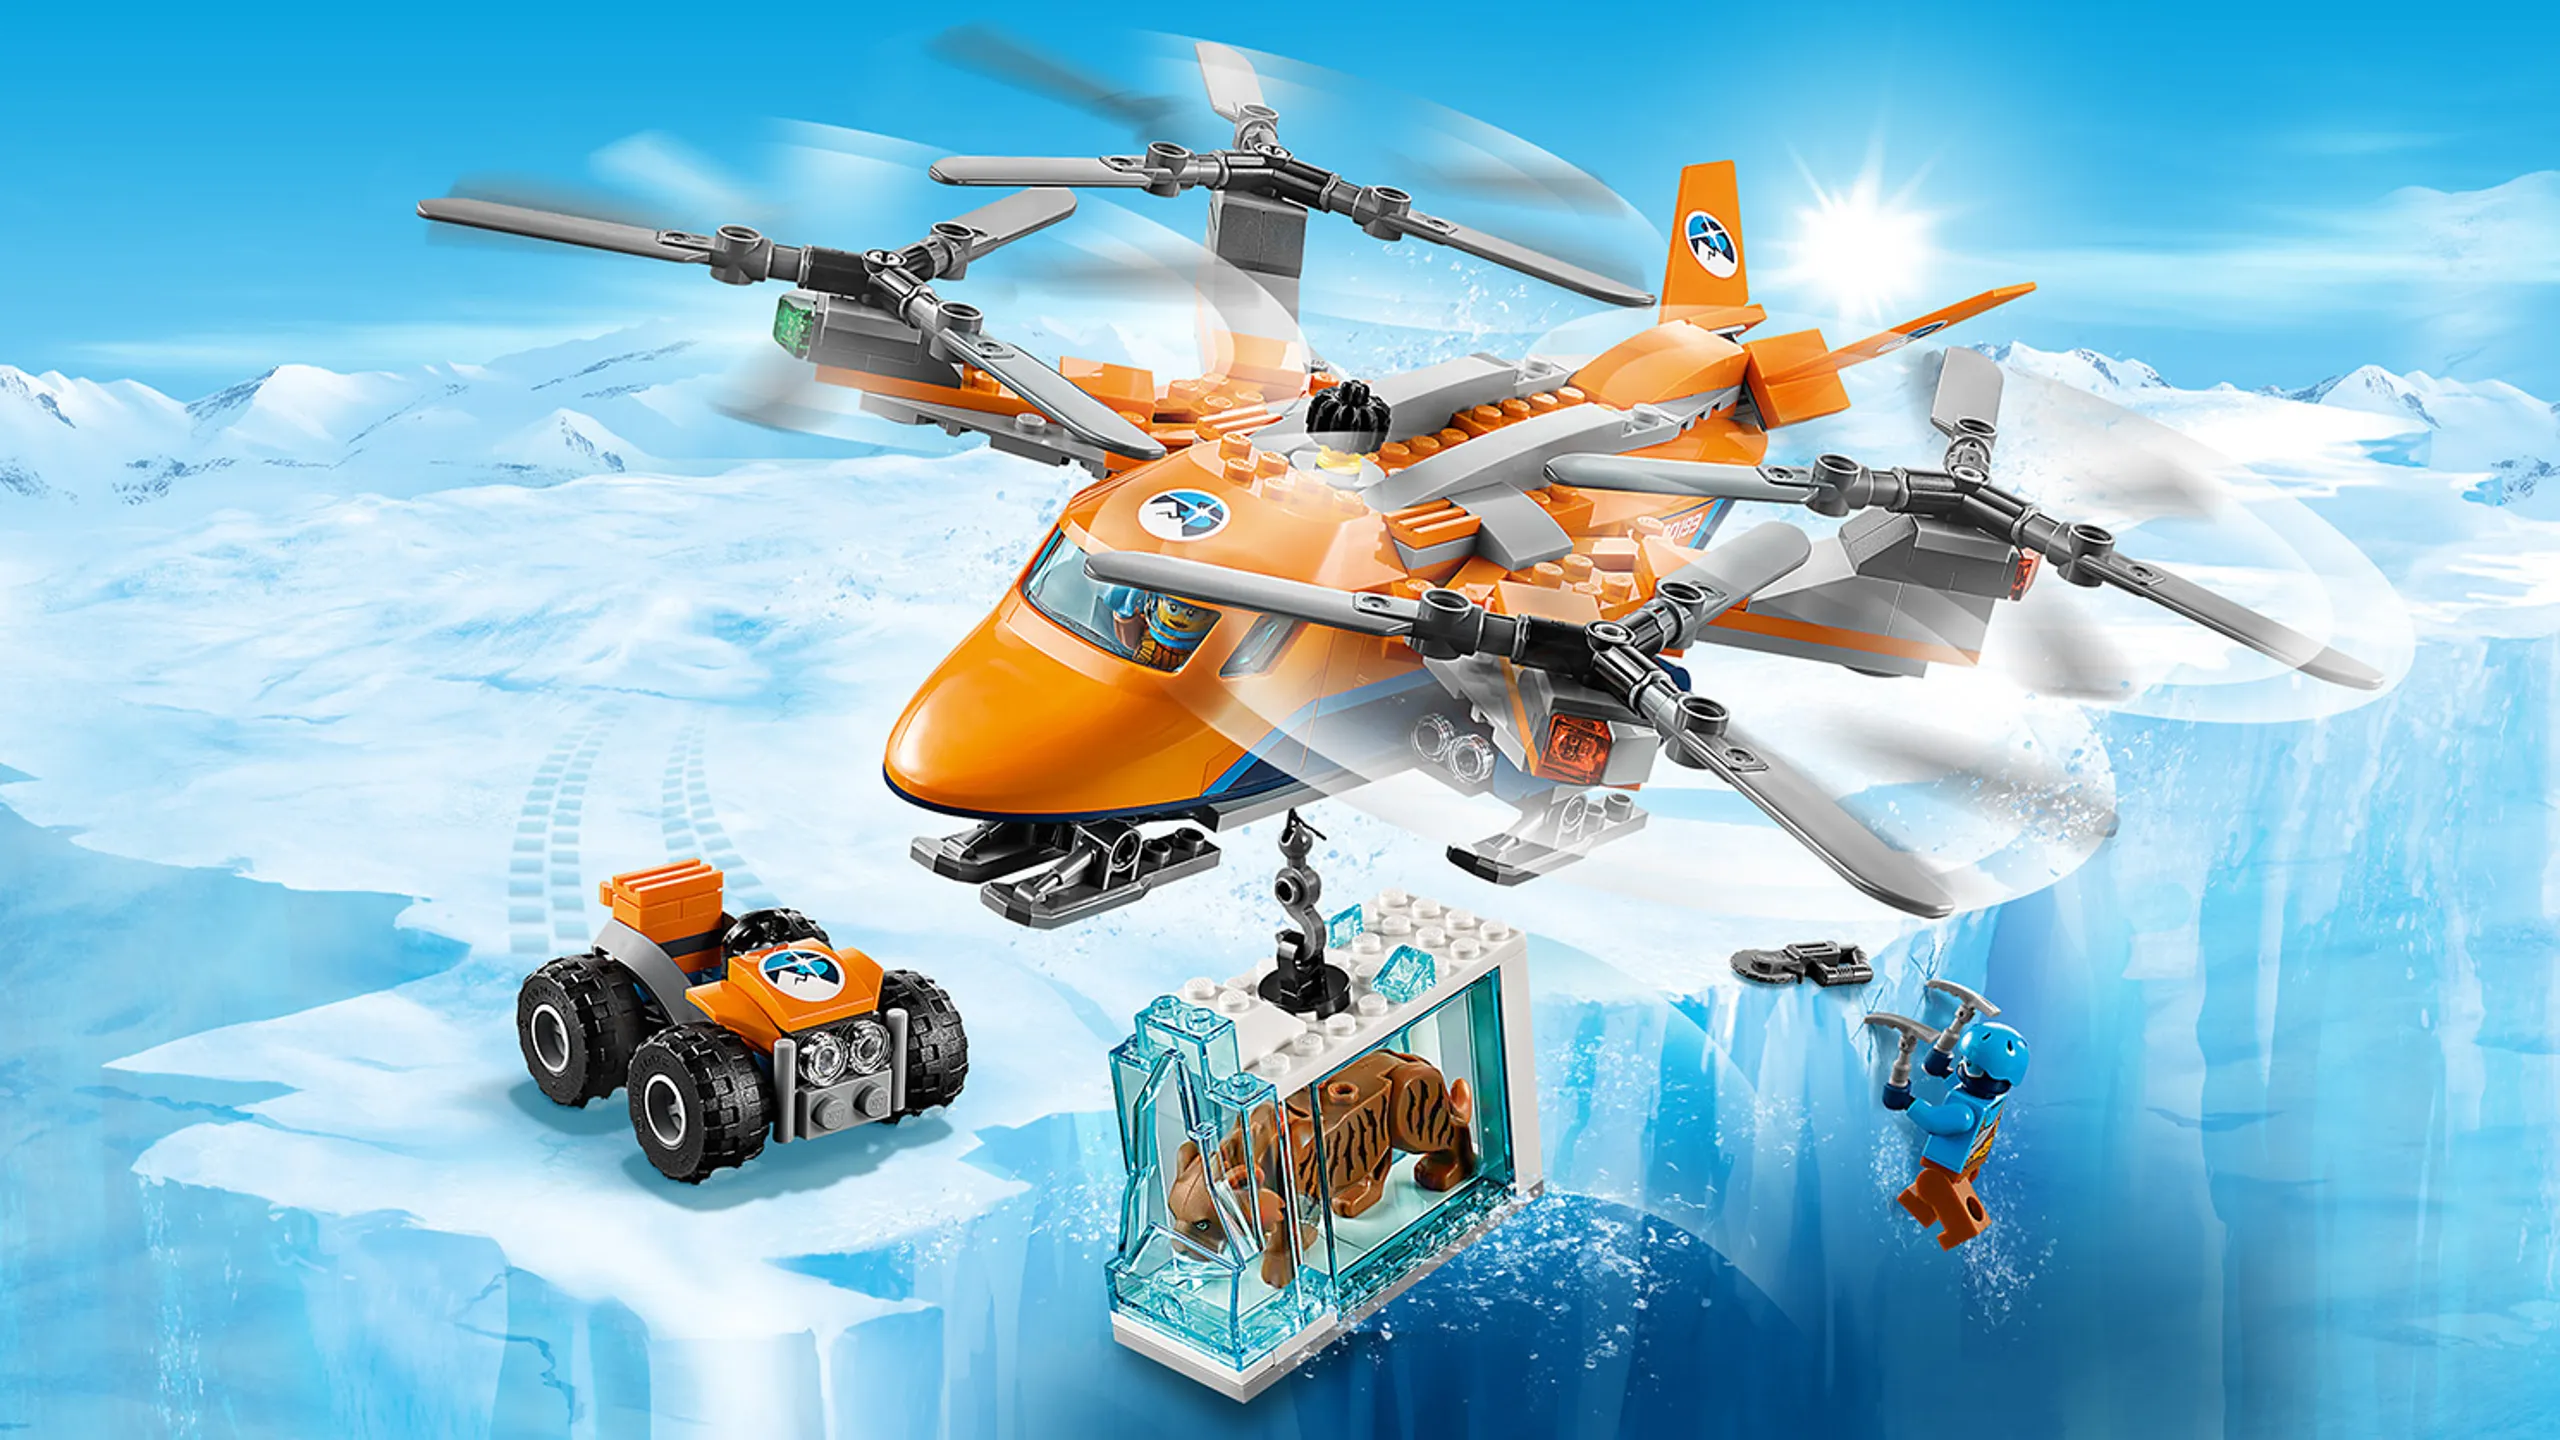 LEGO City Arctic Expedition - 60193 Arctic Air Transport - Carry a big a preserved prehistoric animal inside a block of ice with the orange plane that has 4 propellers on the top.